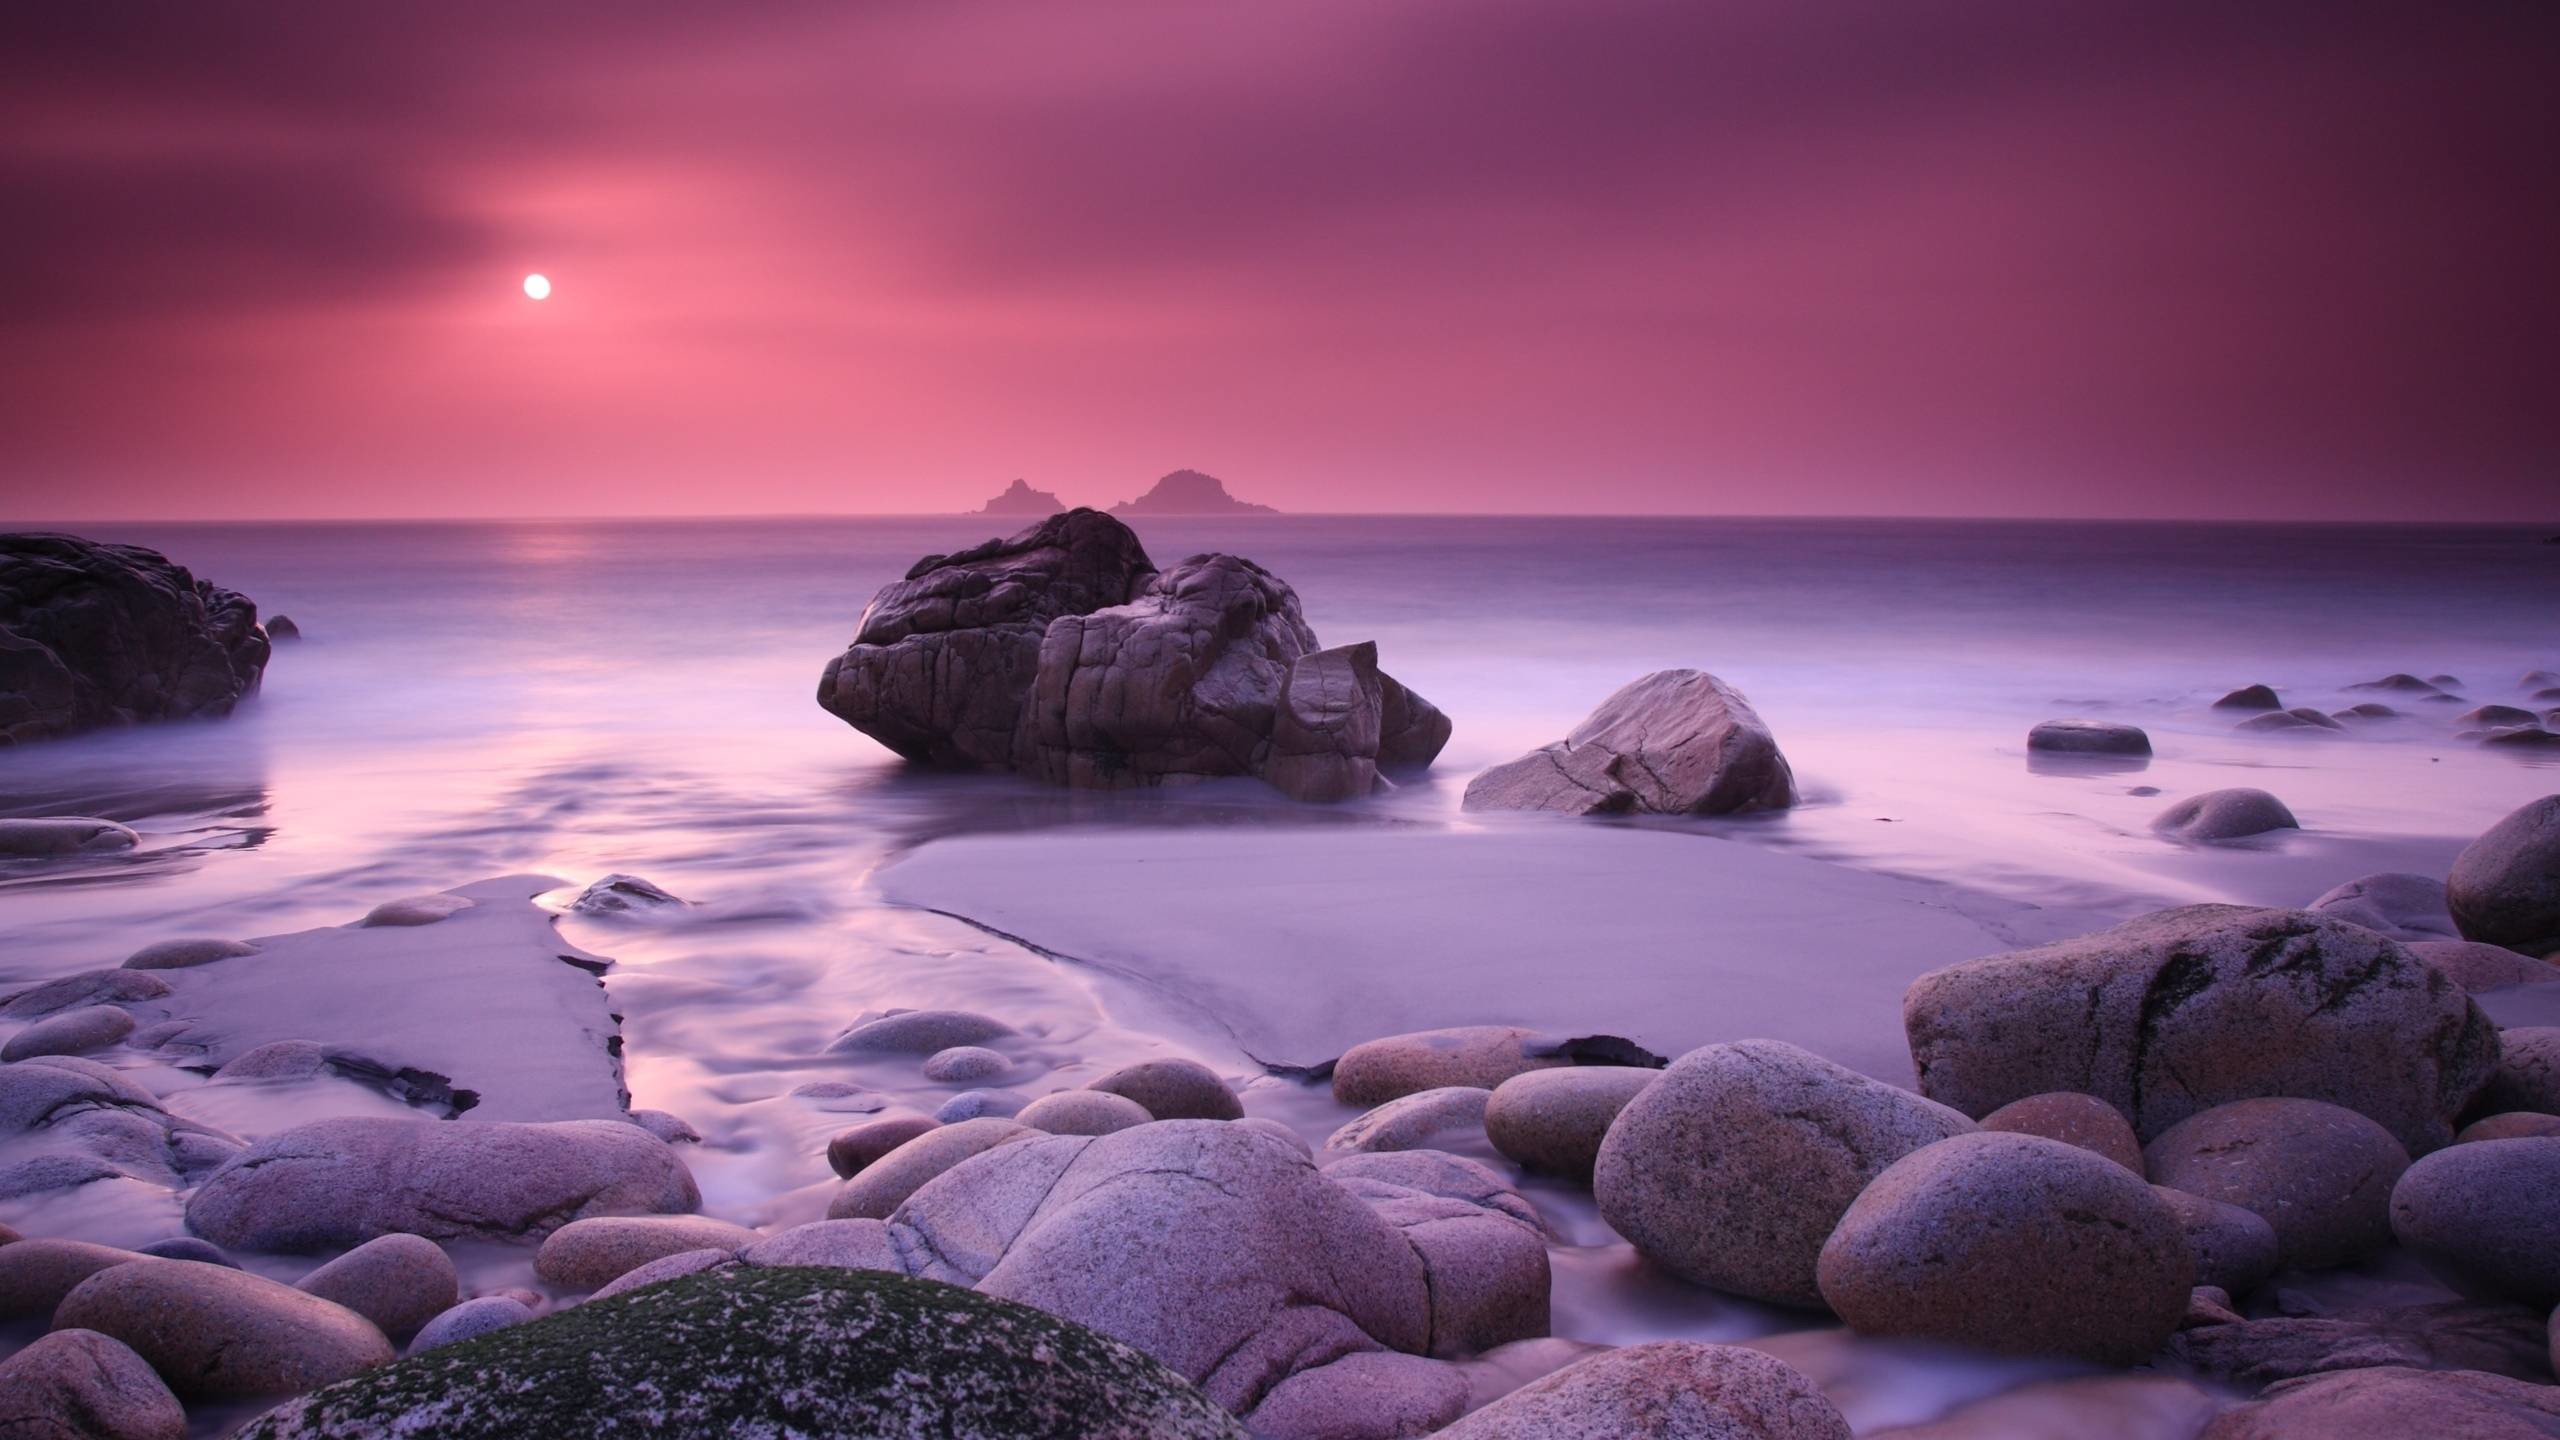 2560x1440 Pink-Haze-and-Stones-Wallpaper-for-Your-iMac